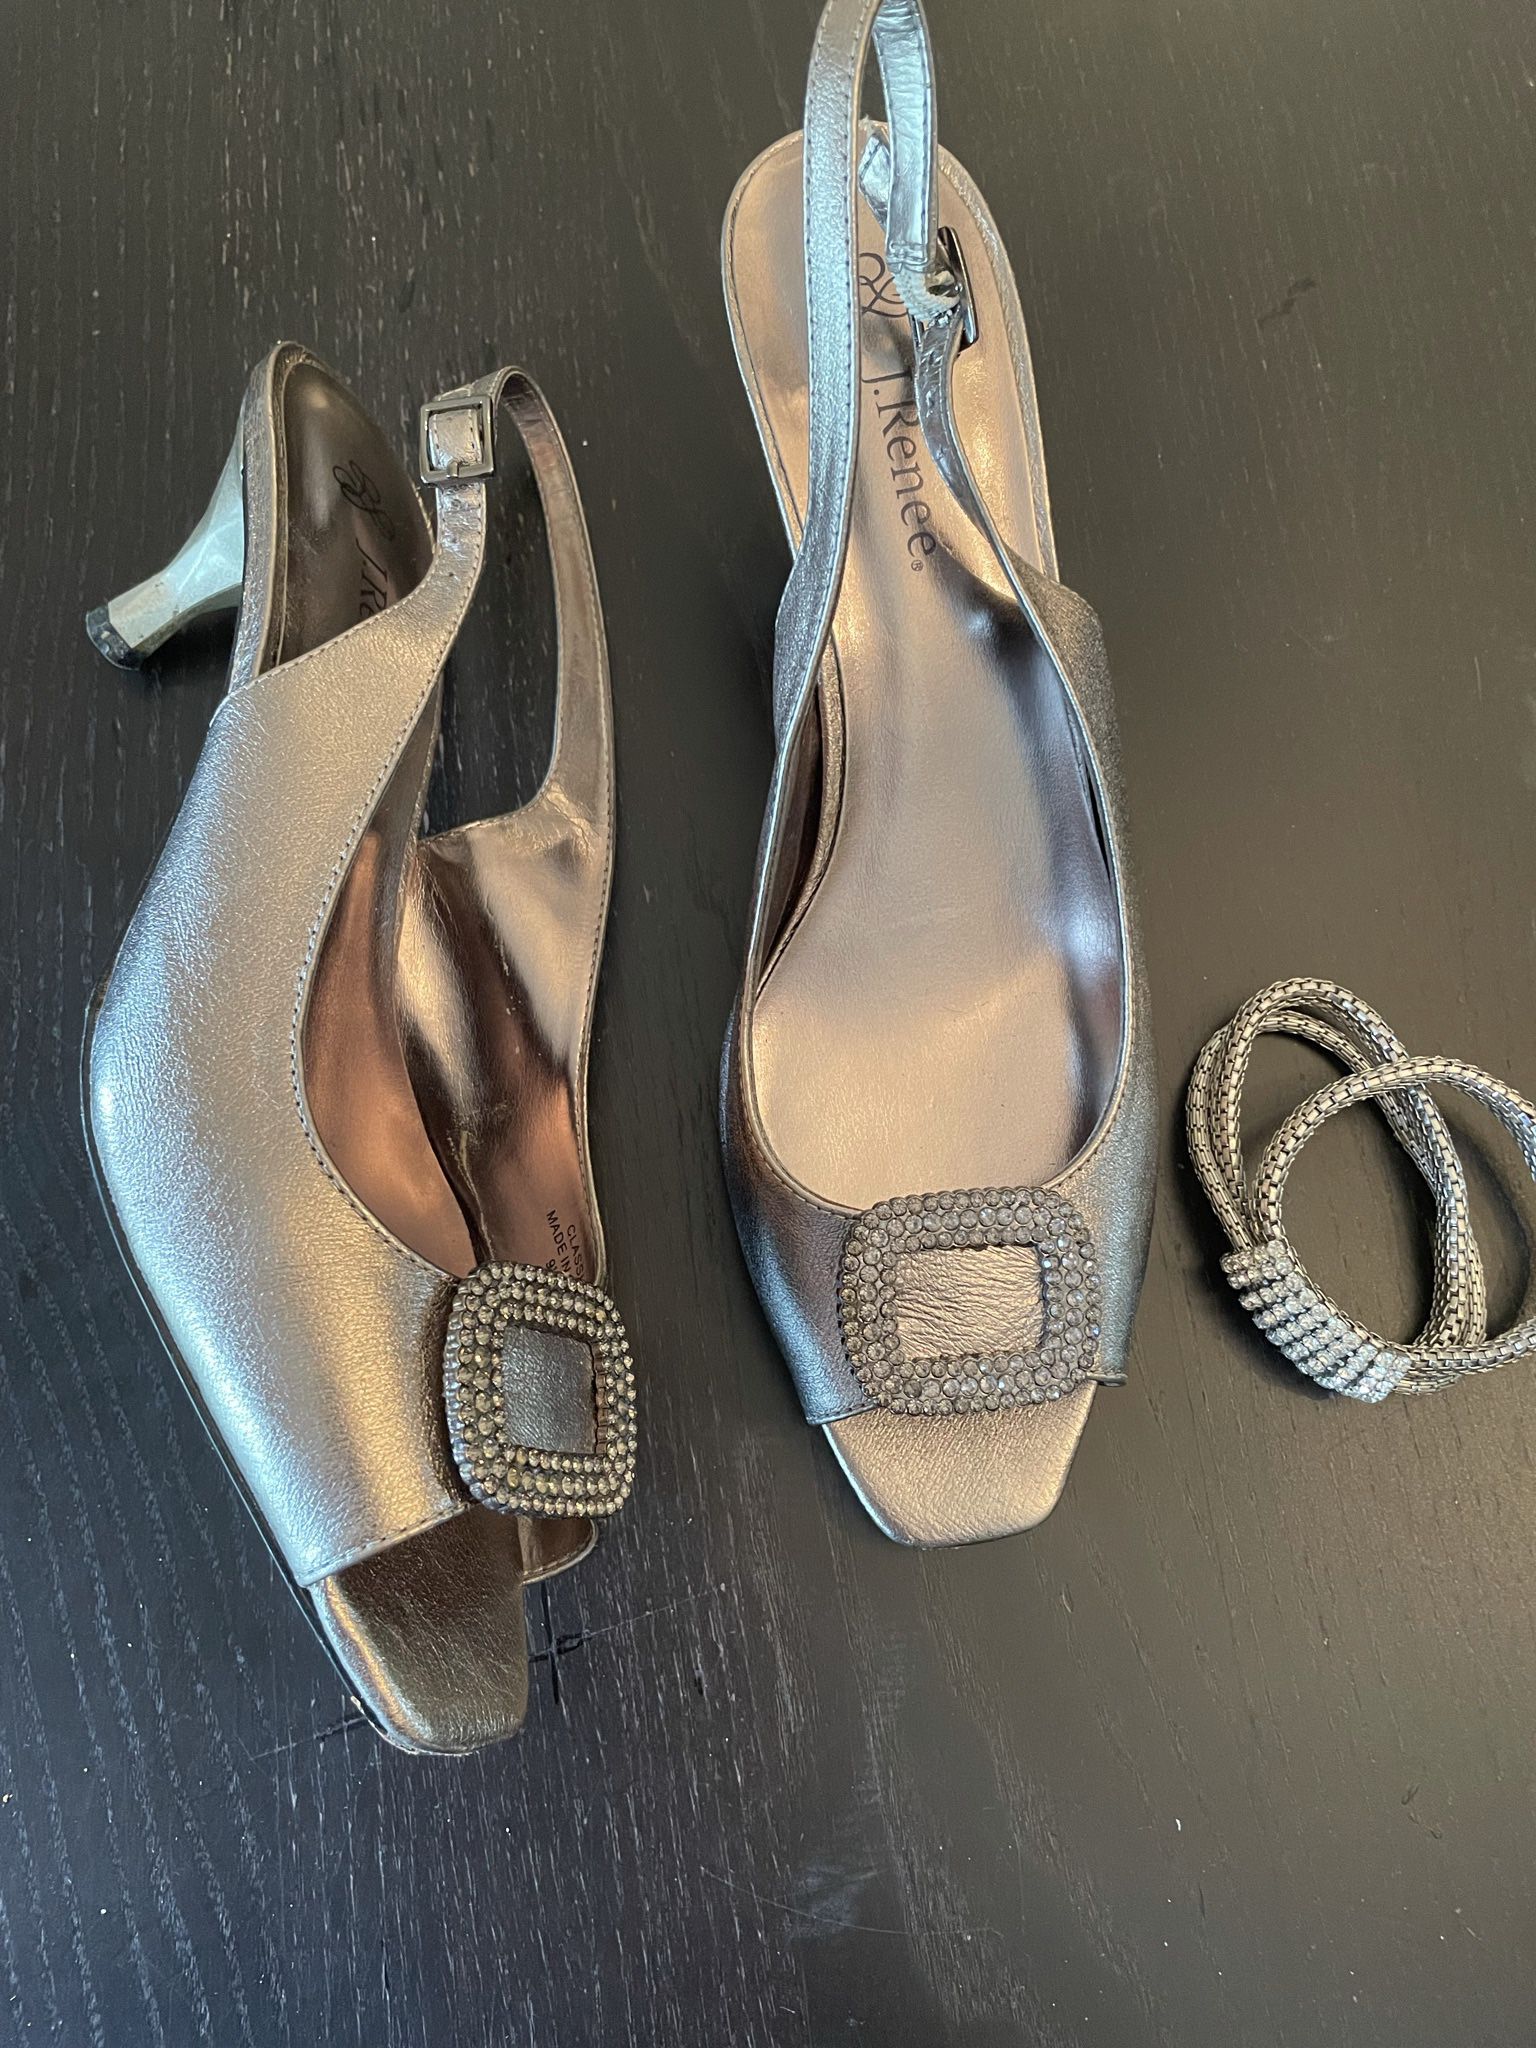 J Renee Silver Leather Shoes Size 9.5 With Matching Silver Bracelet